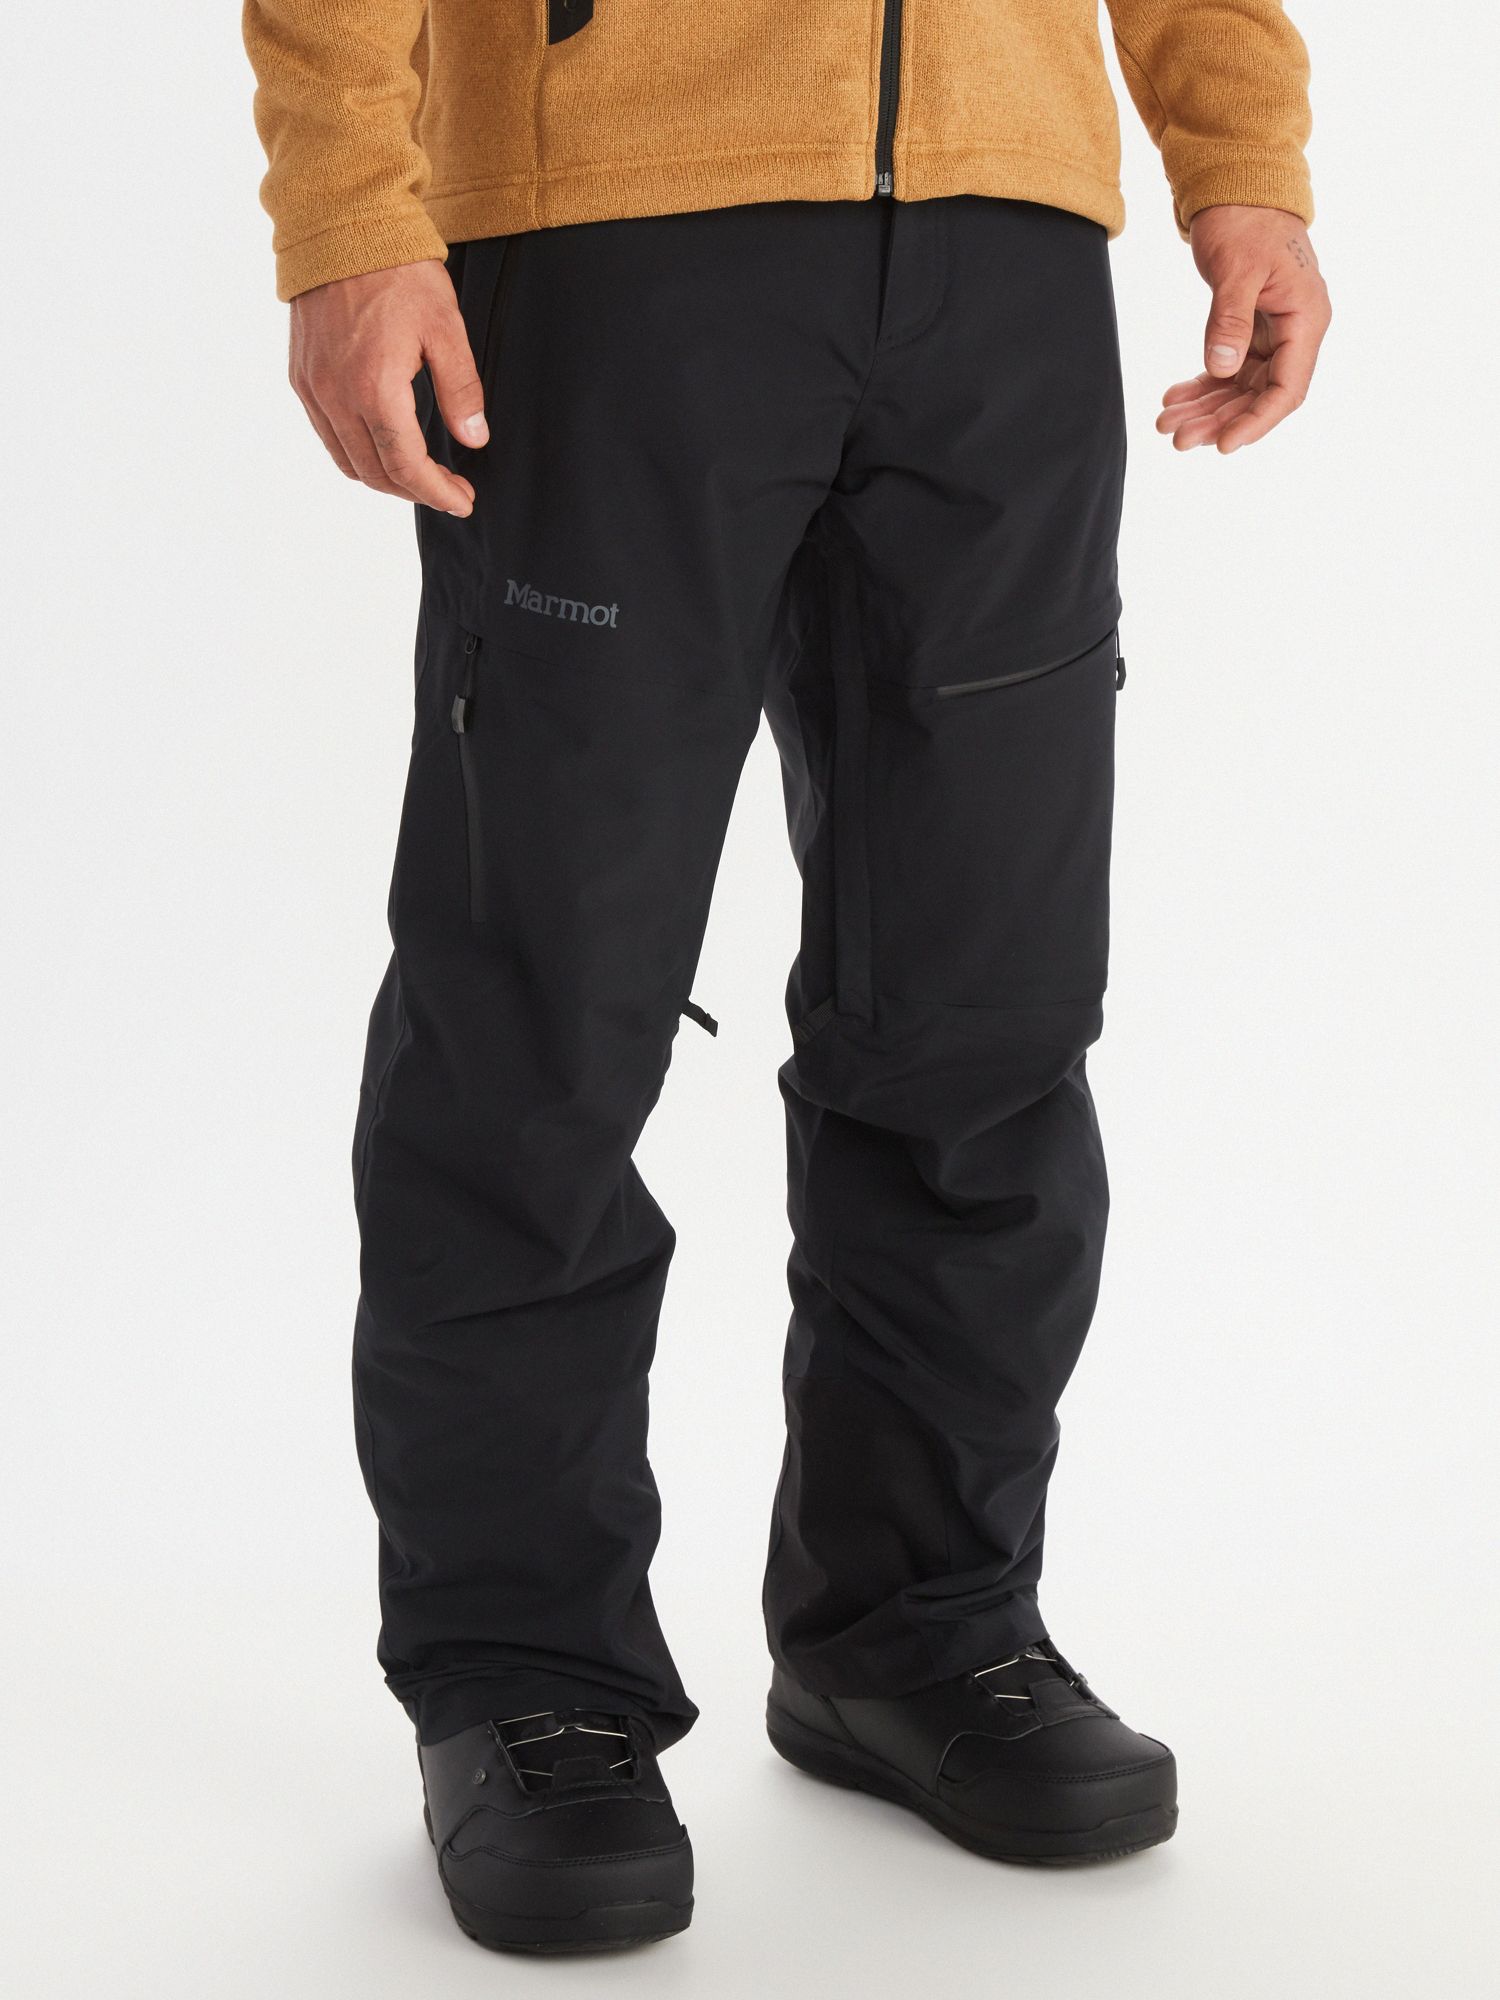 Men's Layout Insulated Cargo Pants - Short